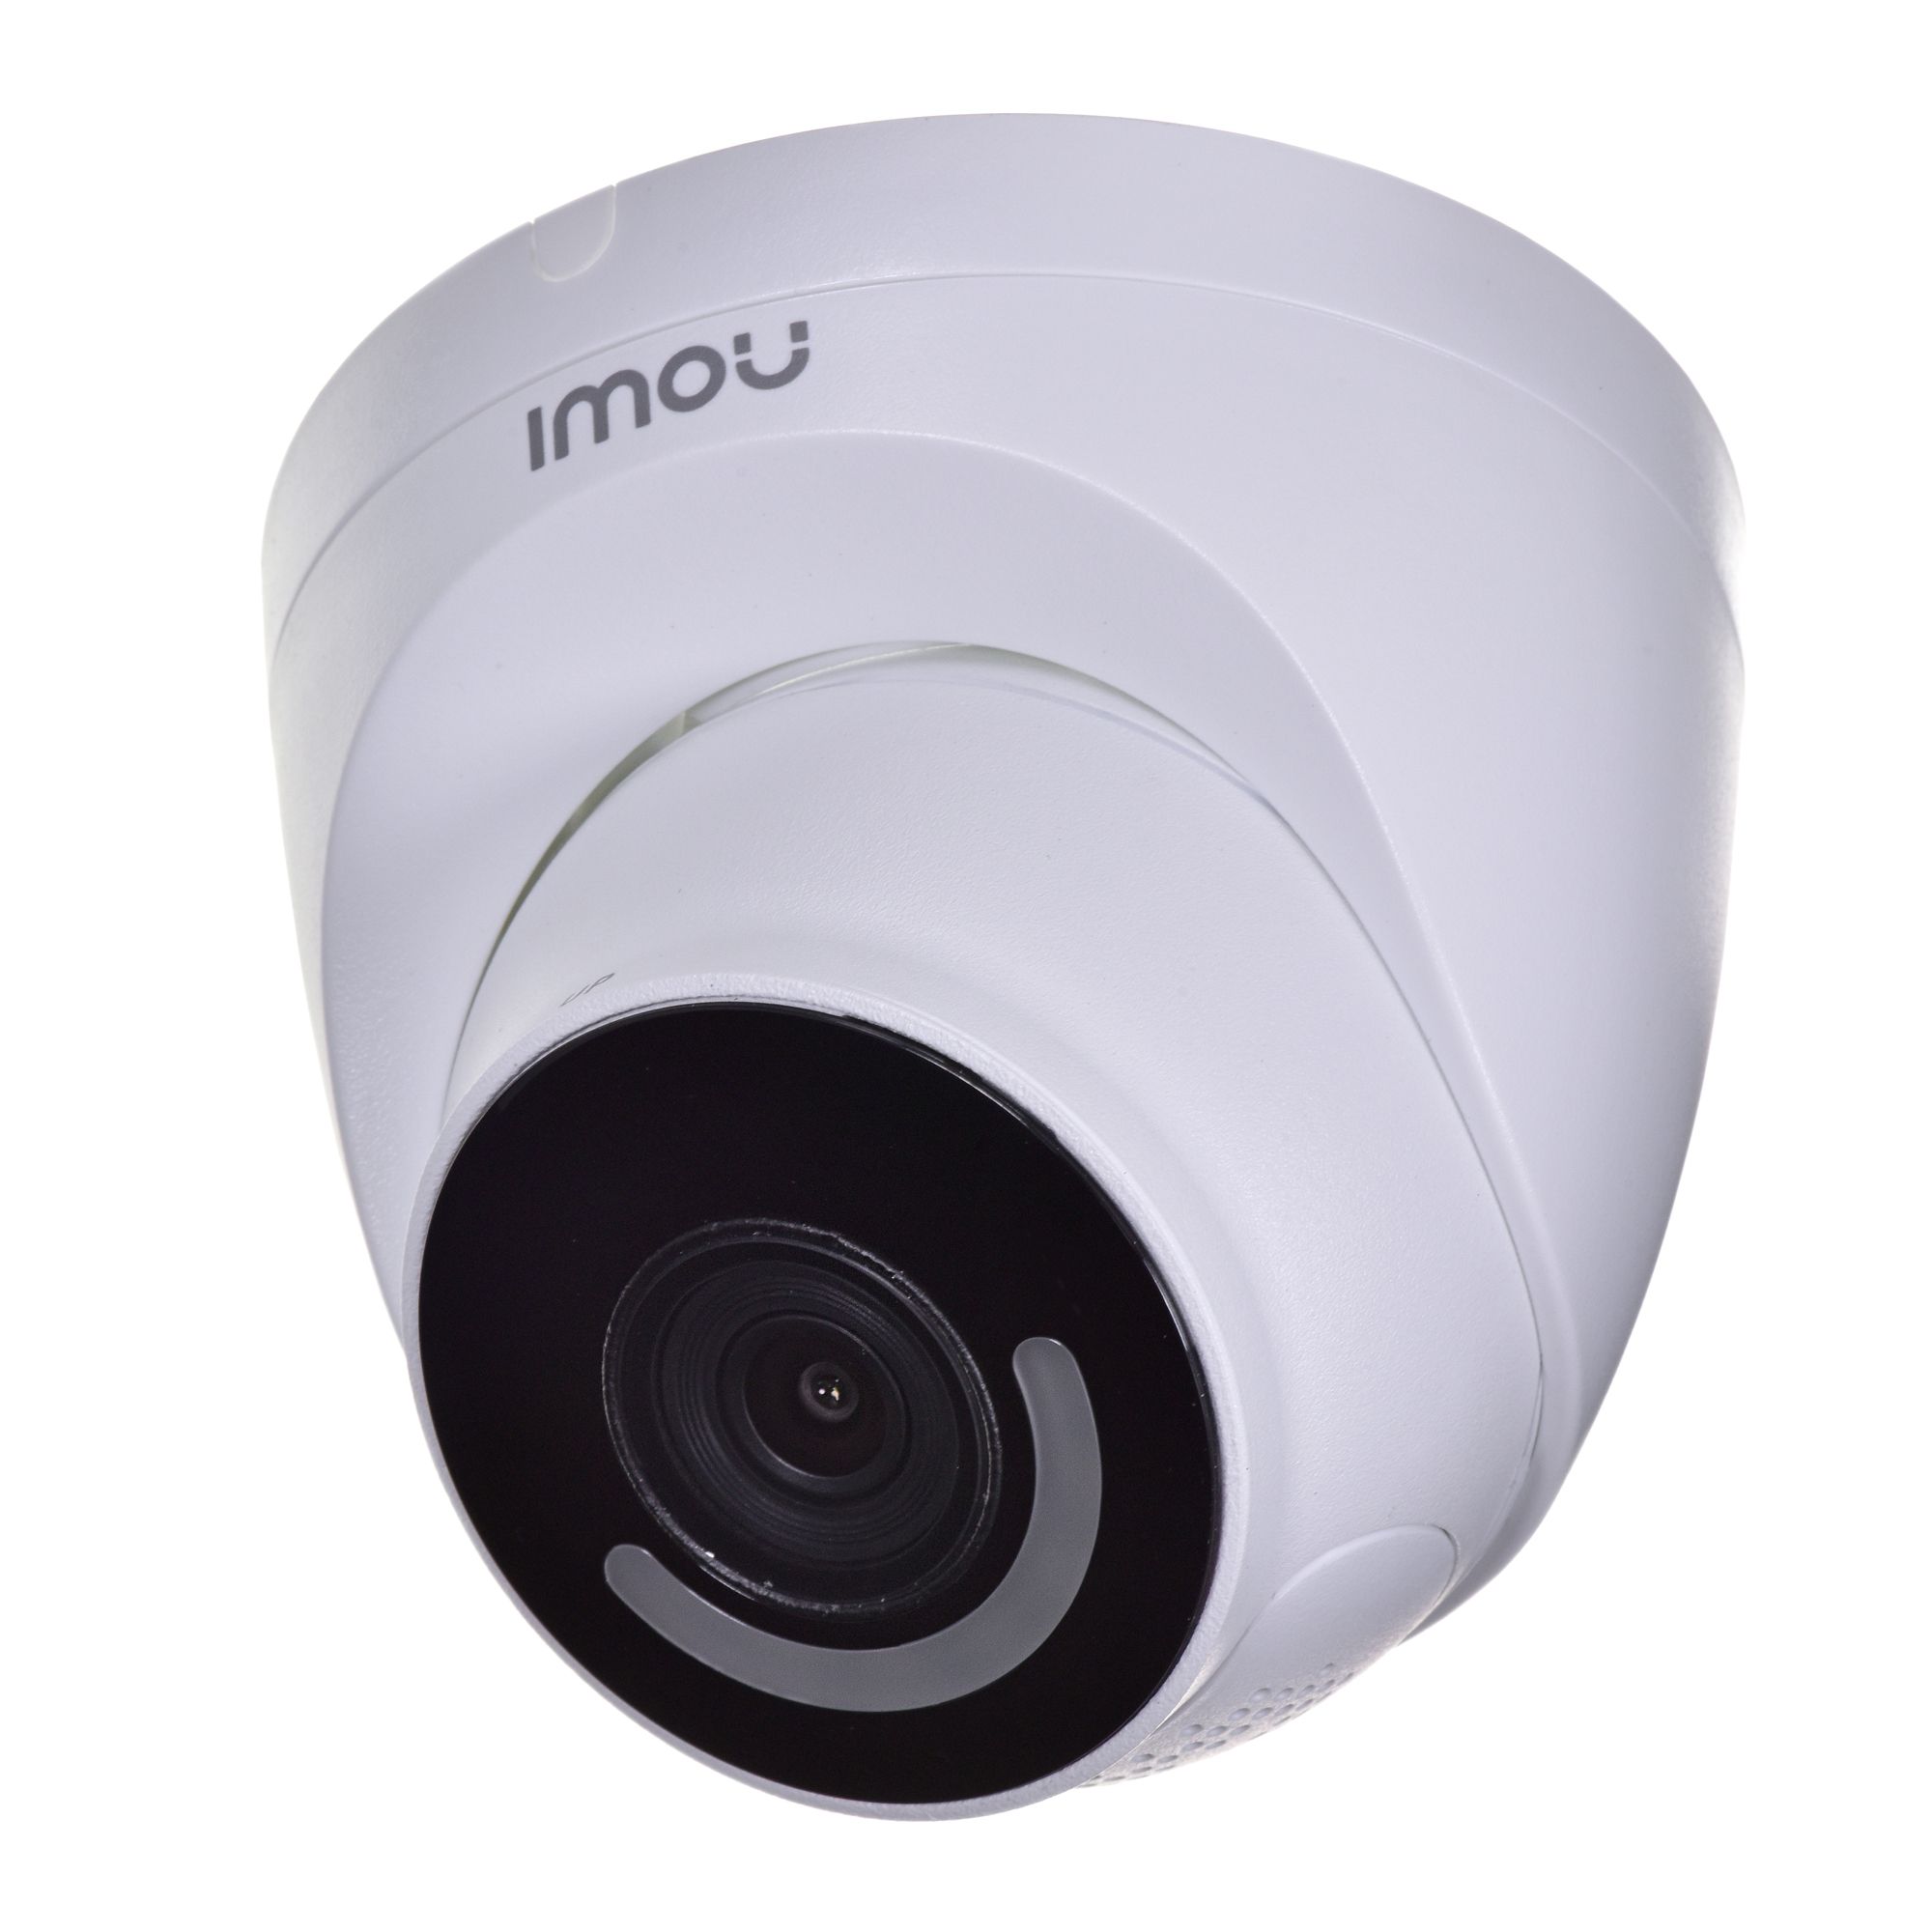 DAHUA IMOU TURRET IPC-T26EP IP security camera Outdoor Wi-Fi 2Mpx H.265 White, Black_2